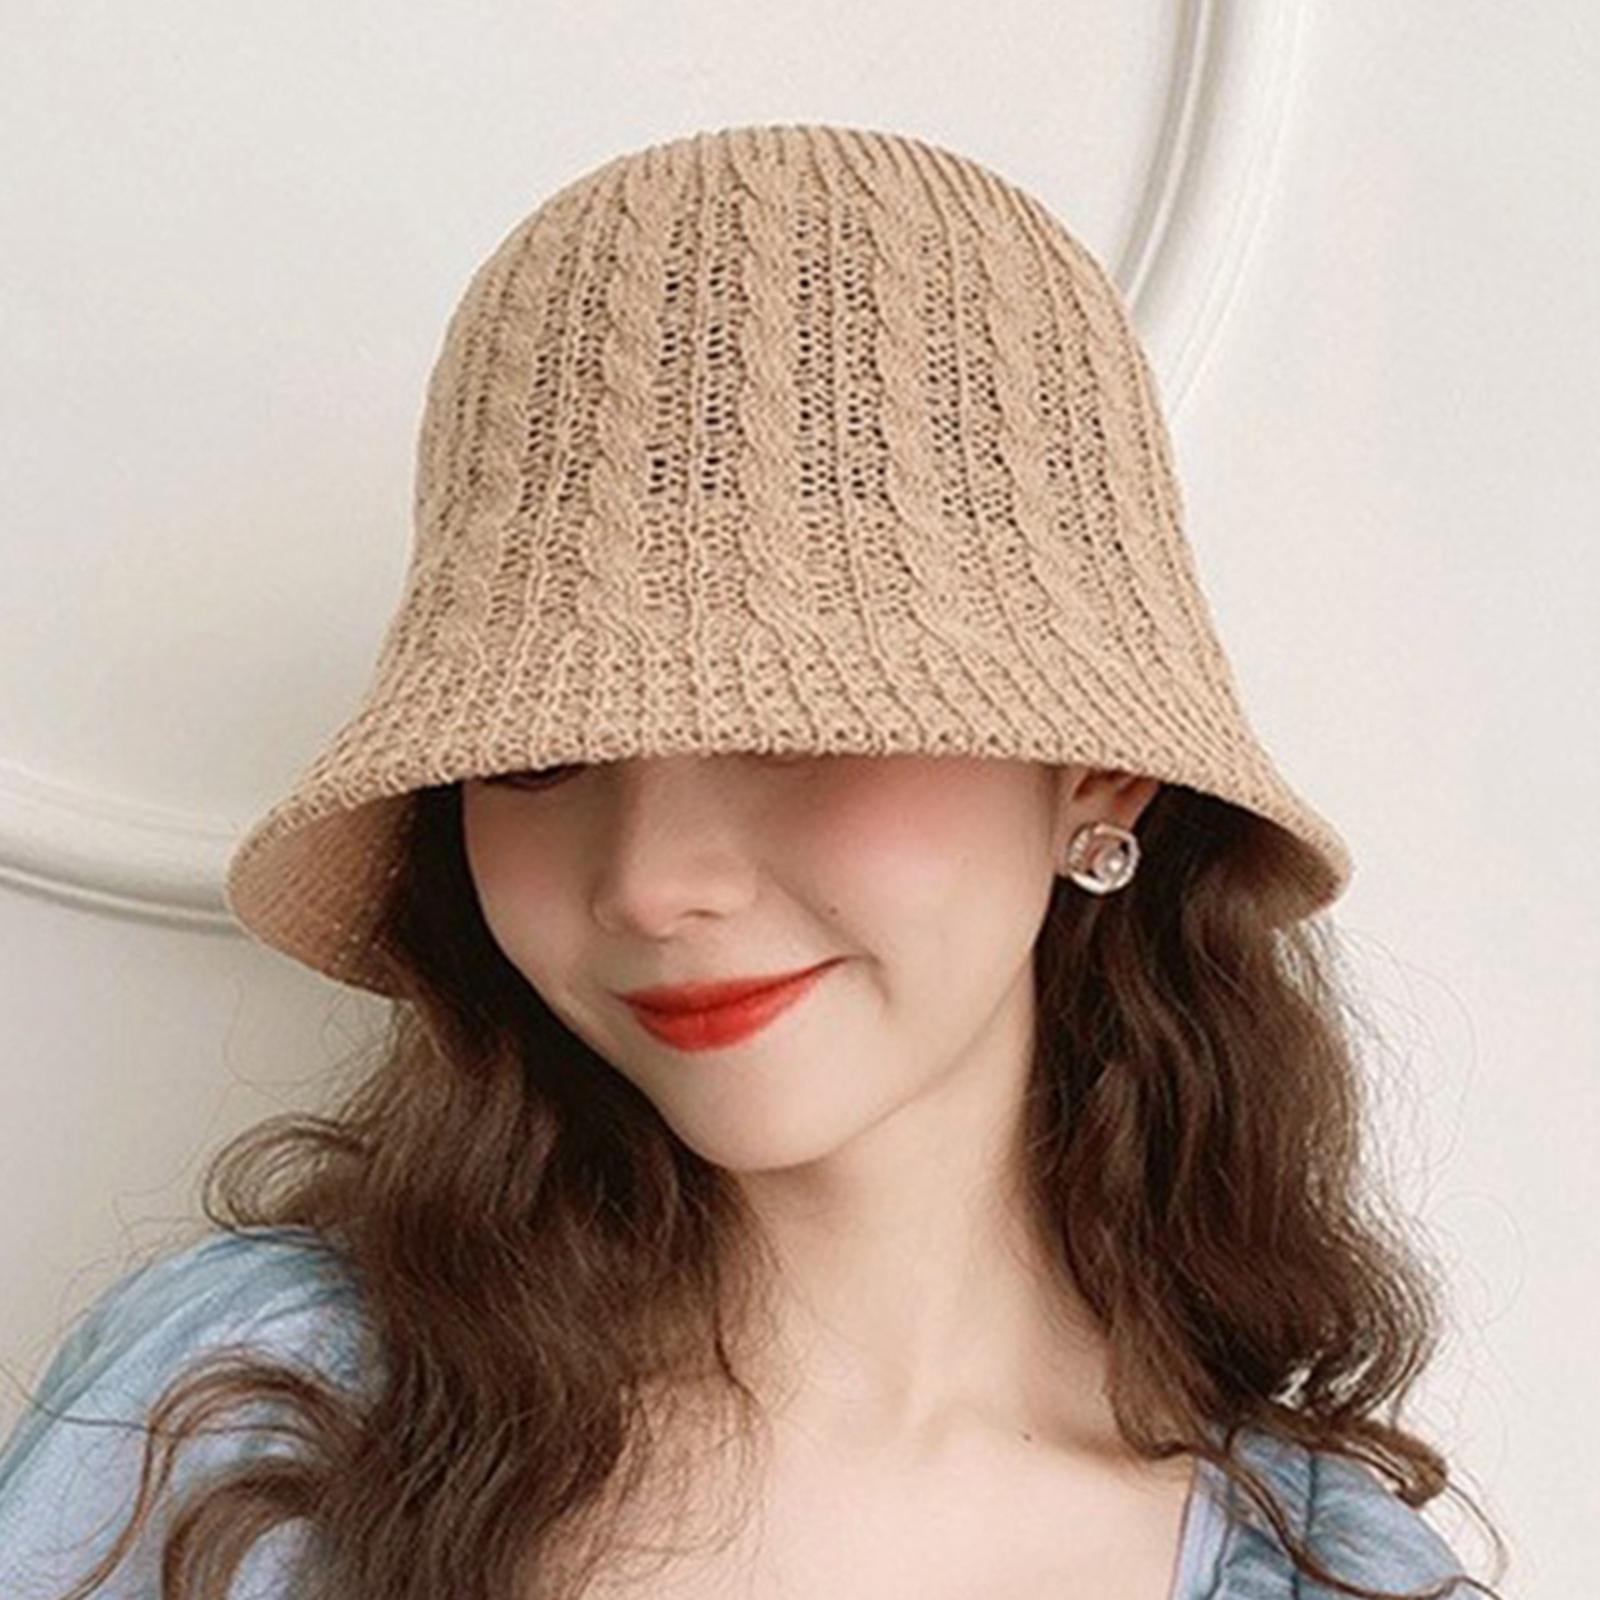 Japanese Women Bucket Hat Breathable Thin Hollow Sun Protection Crochet Fisherman  Hat for Hiking Travel Outdoor Teens khaki 